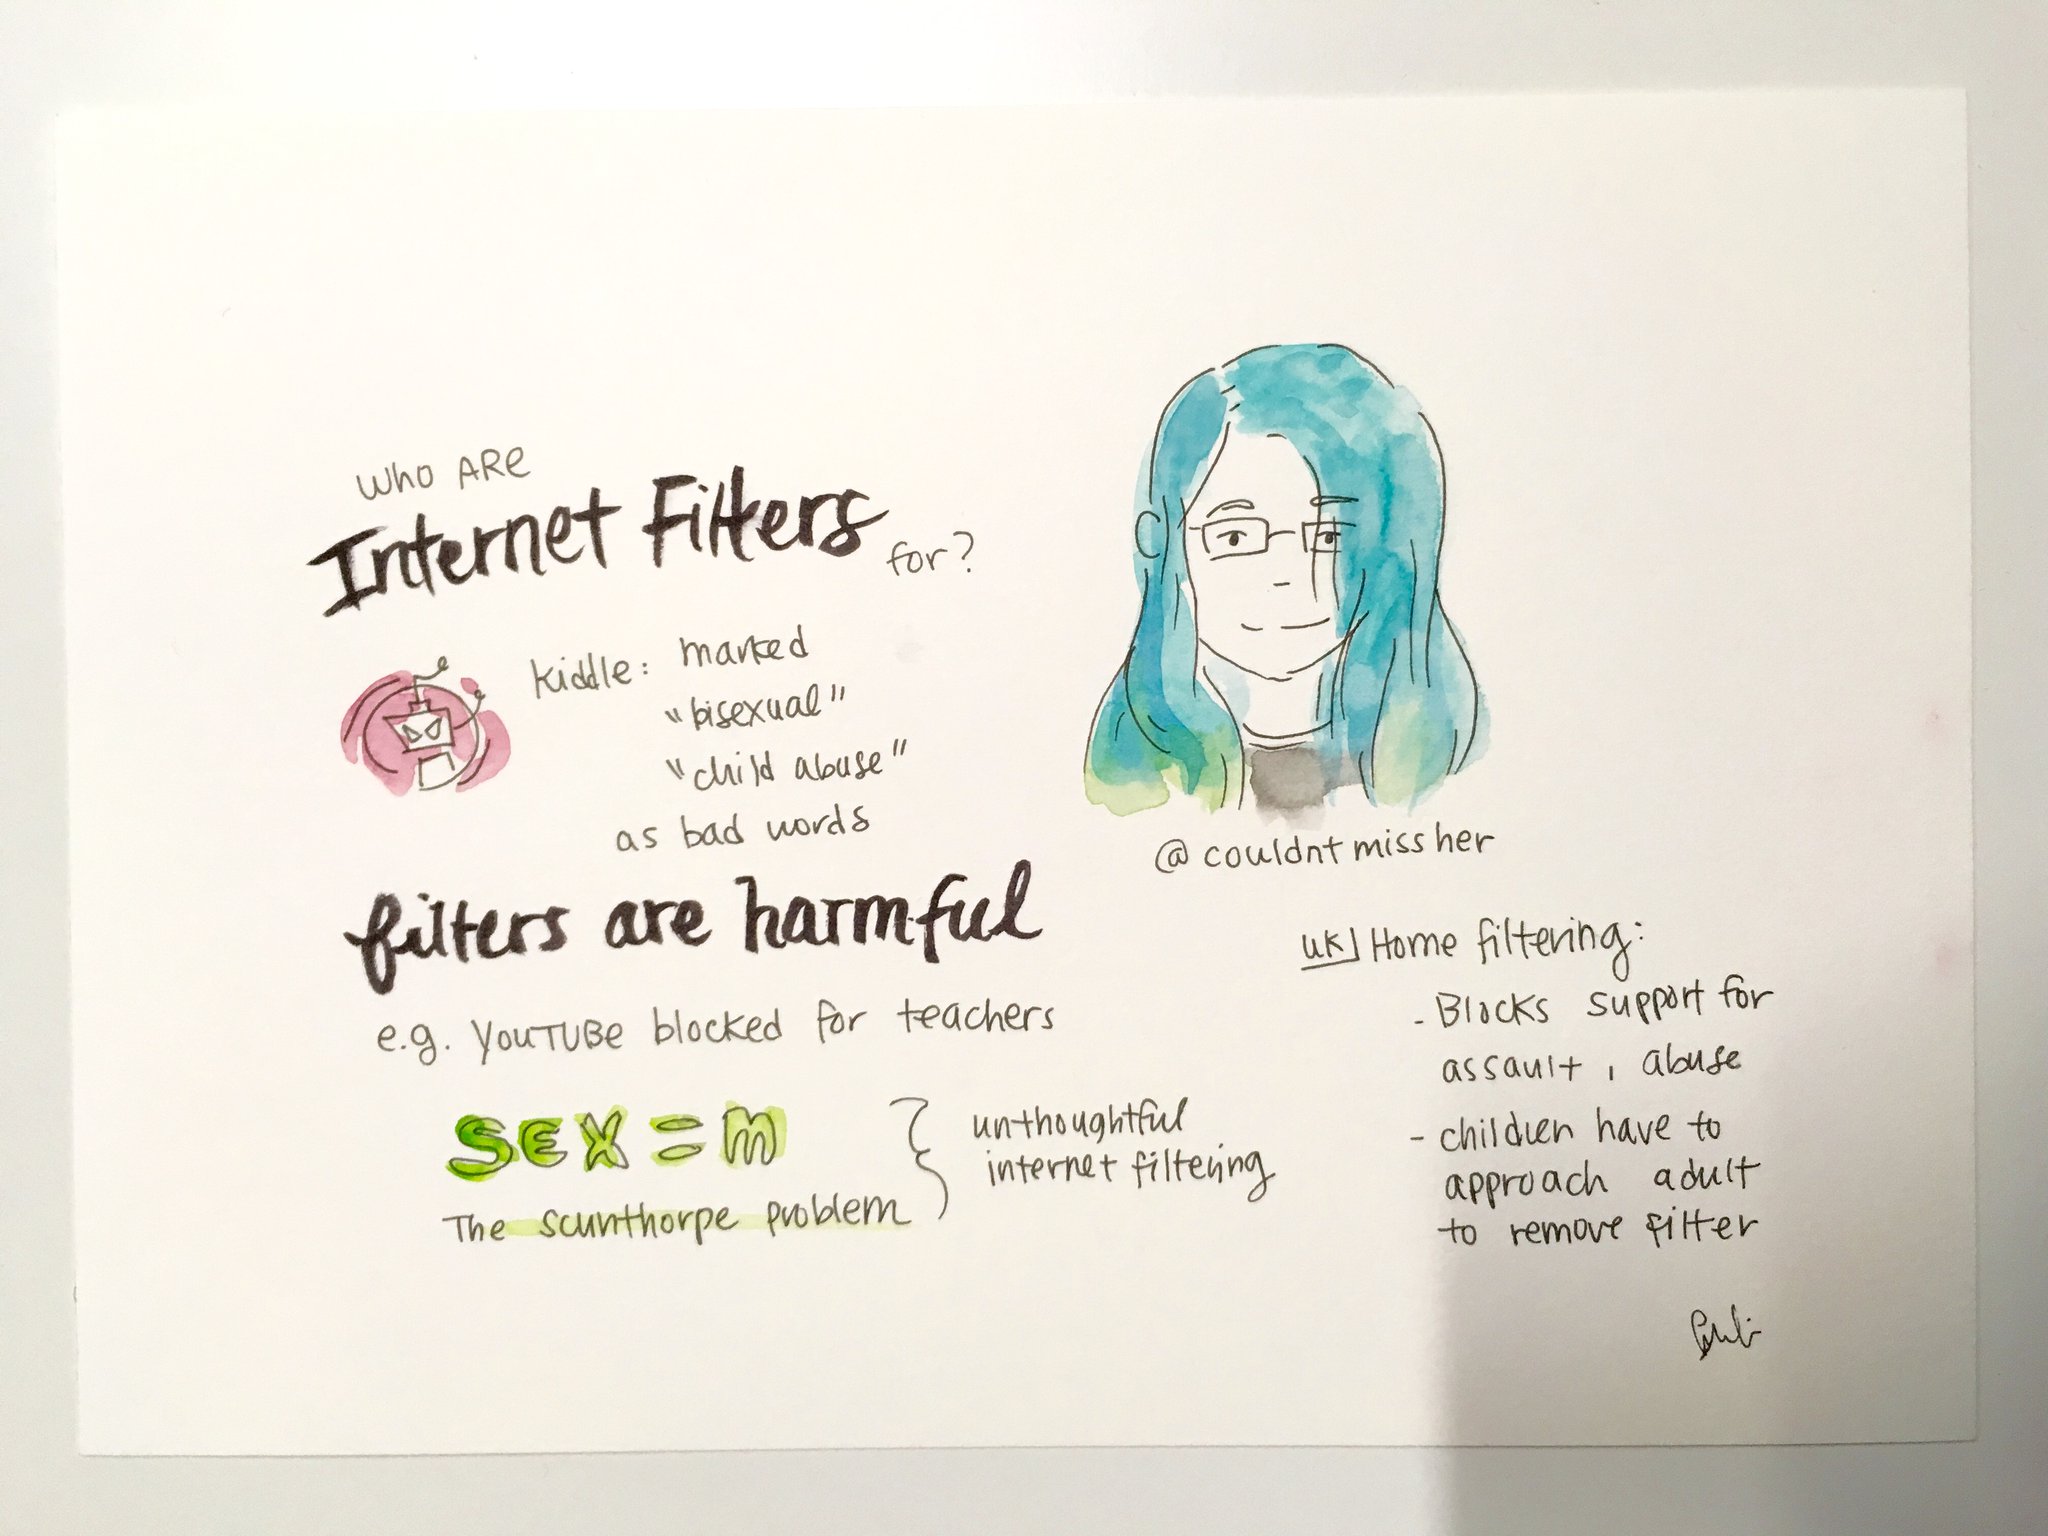 A watercolour painting on A4 card. It has a big picture of my face in the upper right, with my Twitter handle (@couldntmissher) below it. To the left of it is the title of my talk in fancy writing: "Who ARE Internet Filteres for?", and below that a picture of the angry robot in the Kiddle "query blocked" page, and the text 'Kiddle: marked "bisexual", "child abuse" as bad words. The bottom of the page is headed "filters are harmful" in more fancy writing, and it has a few points from my talk: "e.g. YouTUBE blocked for teachers", "UK ⏤ home filtering: blocks support for assault, abuse; children have to approach adult to remove filter.", "sex = m: The Scunthorphe Problem ⏤ unthoughtful internet filtering". There is a small artist's signature in the bottom right corner.